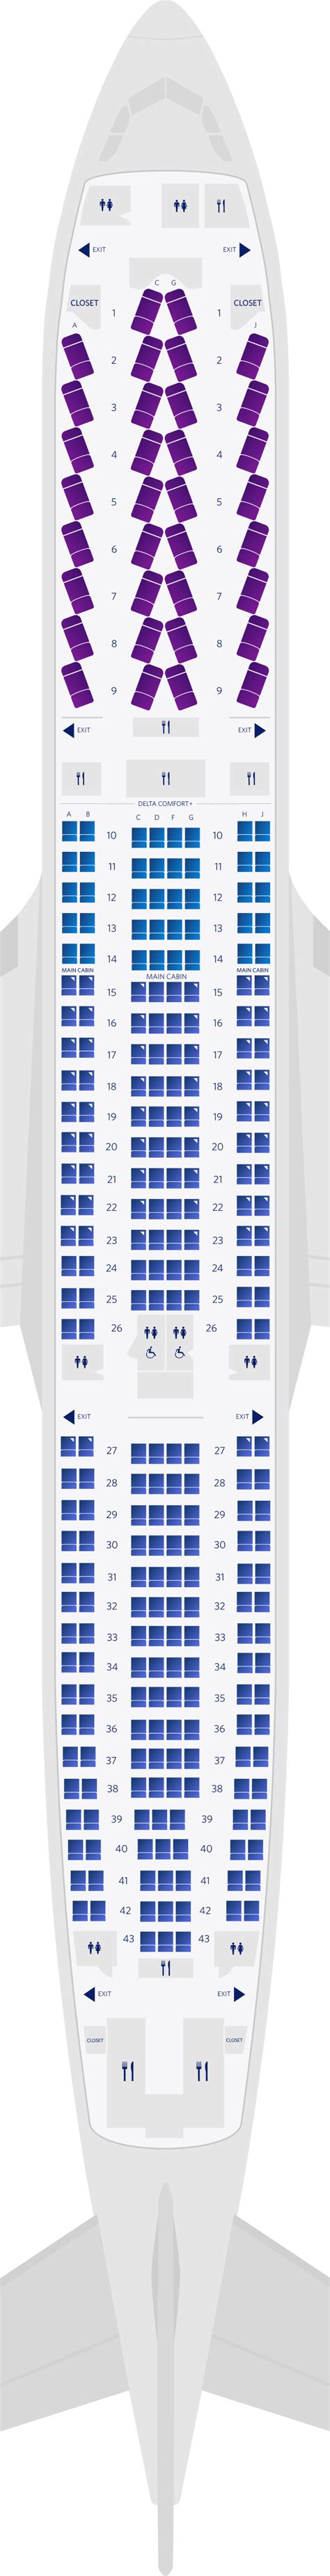 Learn About Imagen Airbus A Seat Map Delta In Thptnganamst Edu Vn